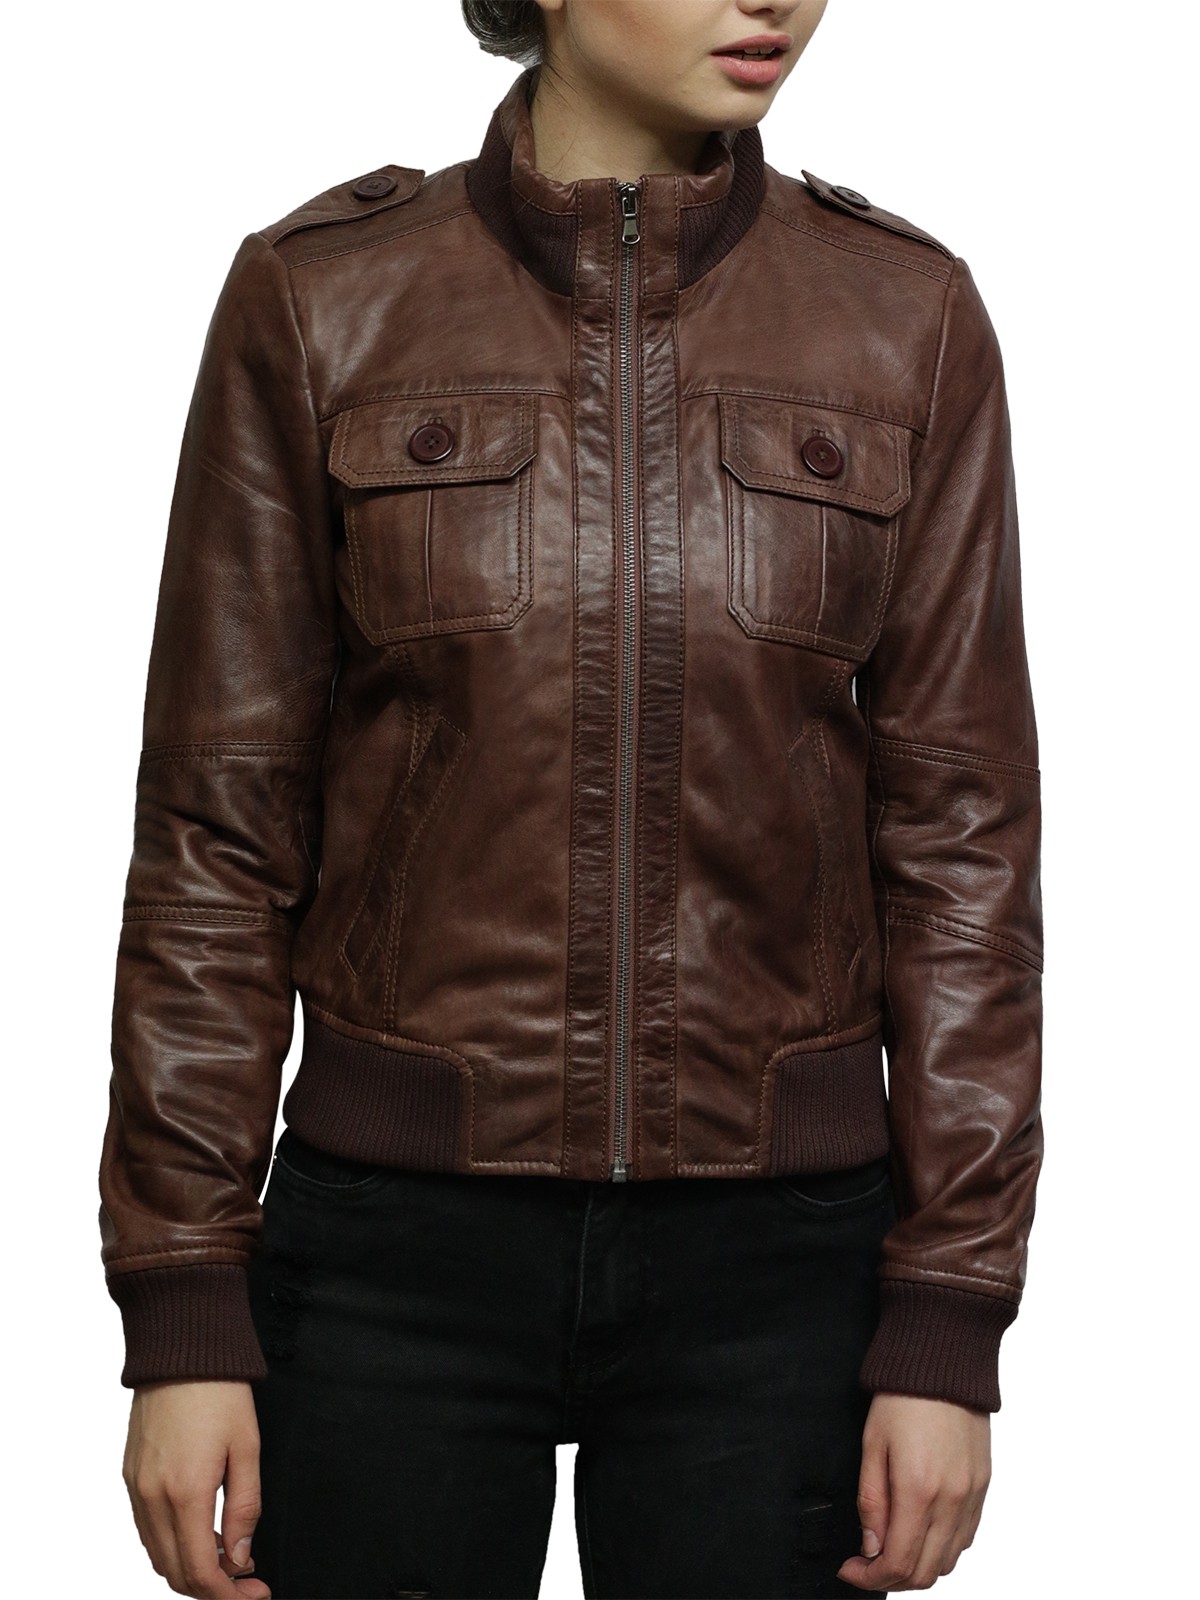 Women's Slim Fit Leather Bomber Jacket